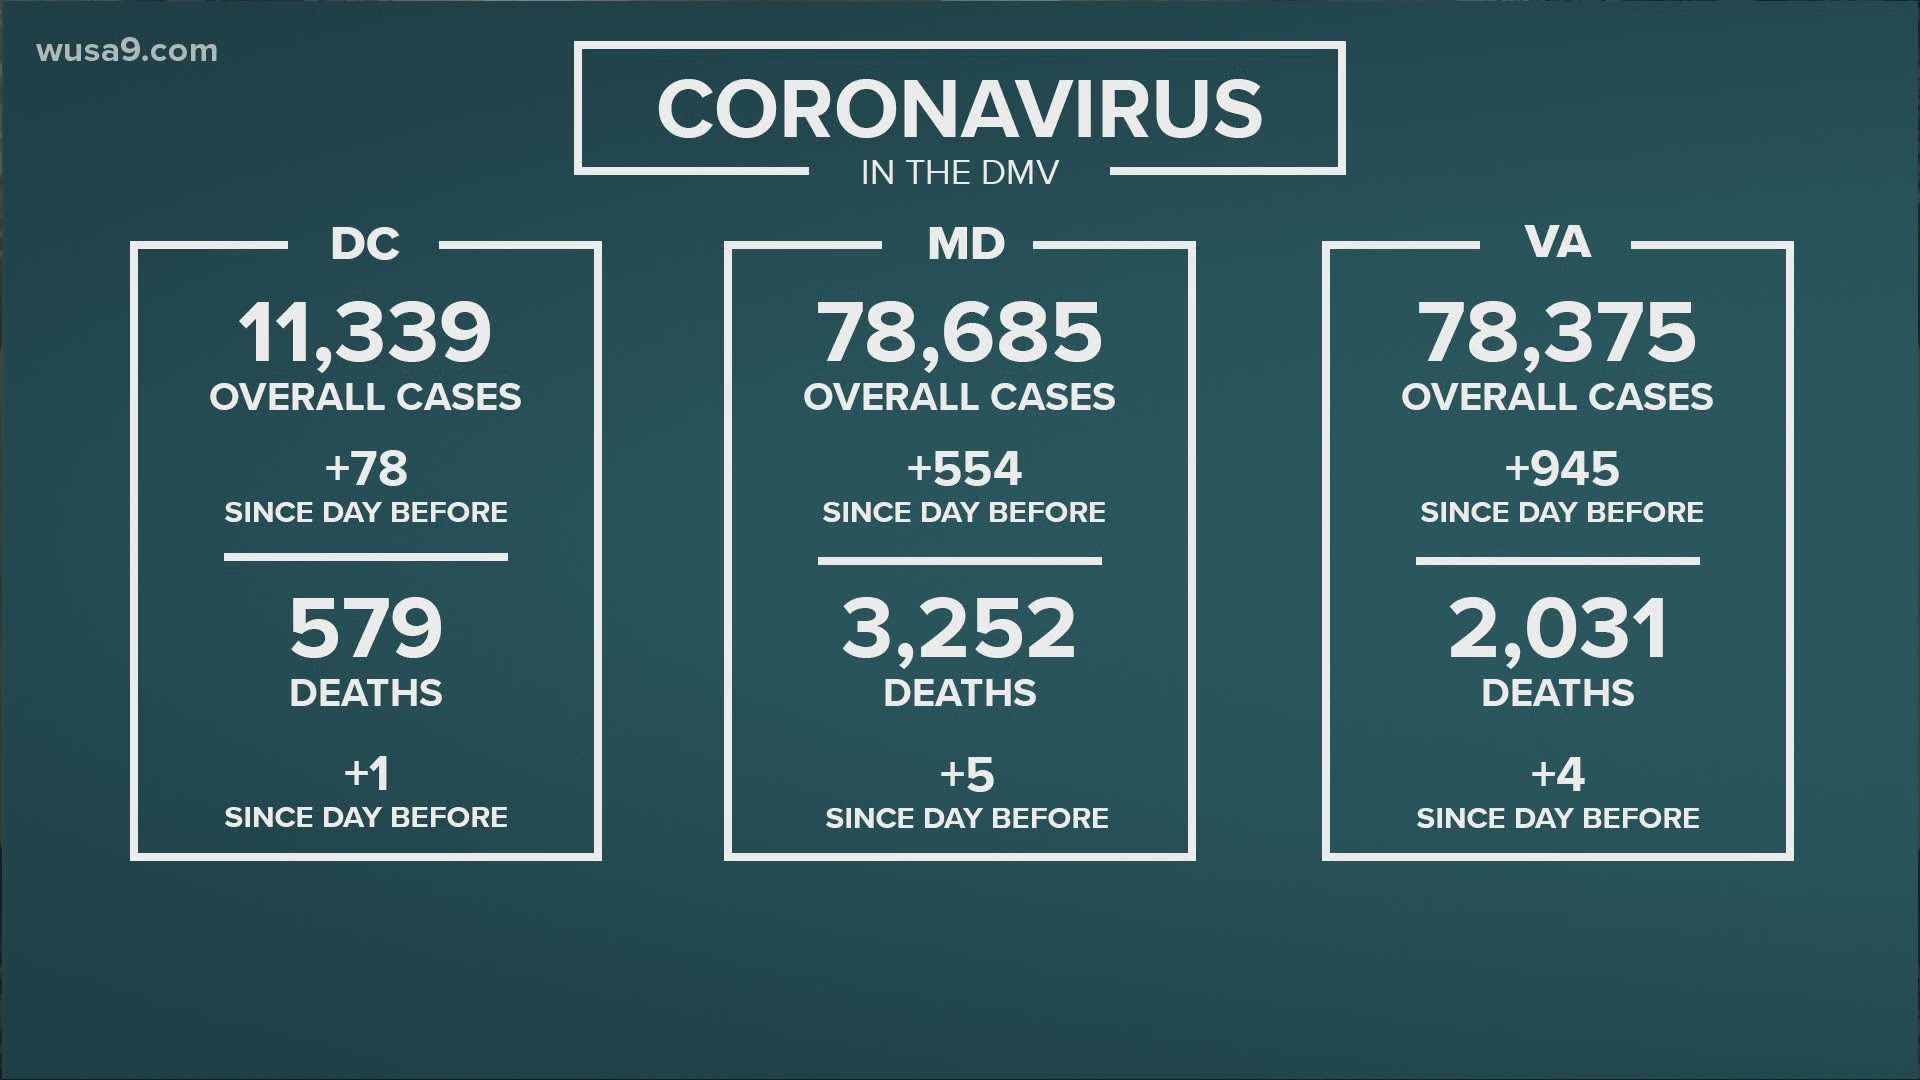 The coronavirus impact on the DMV continues. Here are the latest updates.